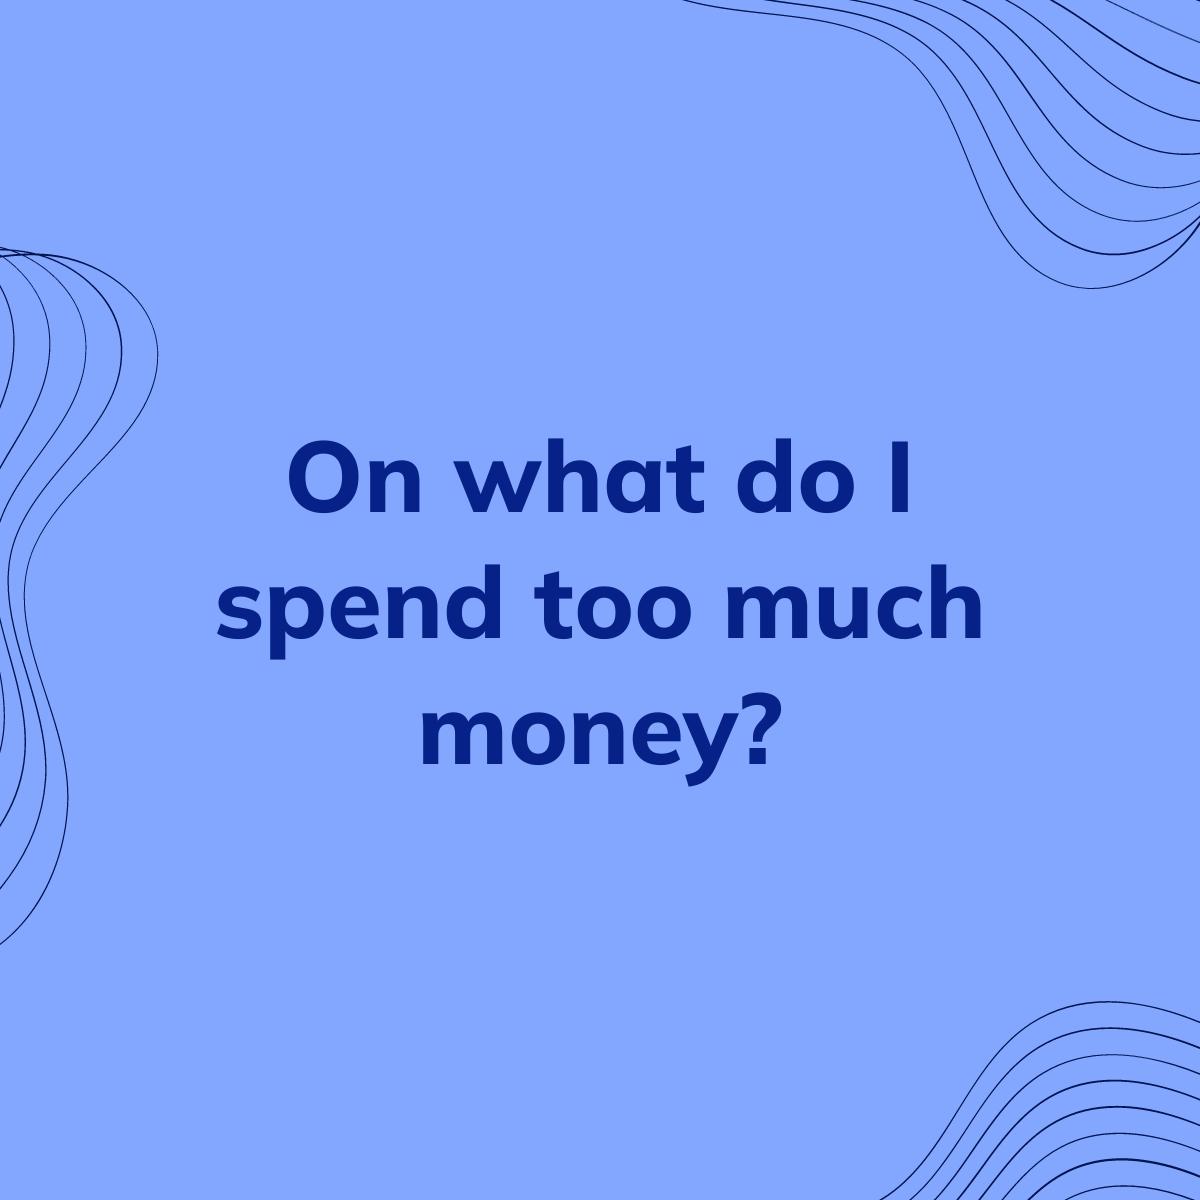 Journal Prompt: On what do I spend too much money?